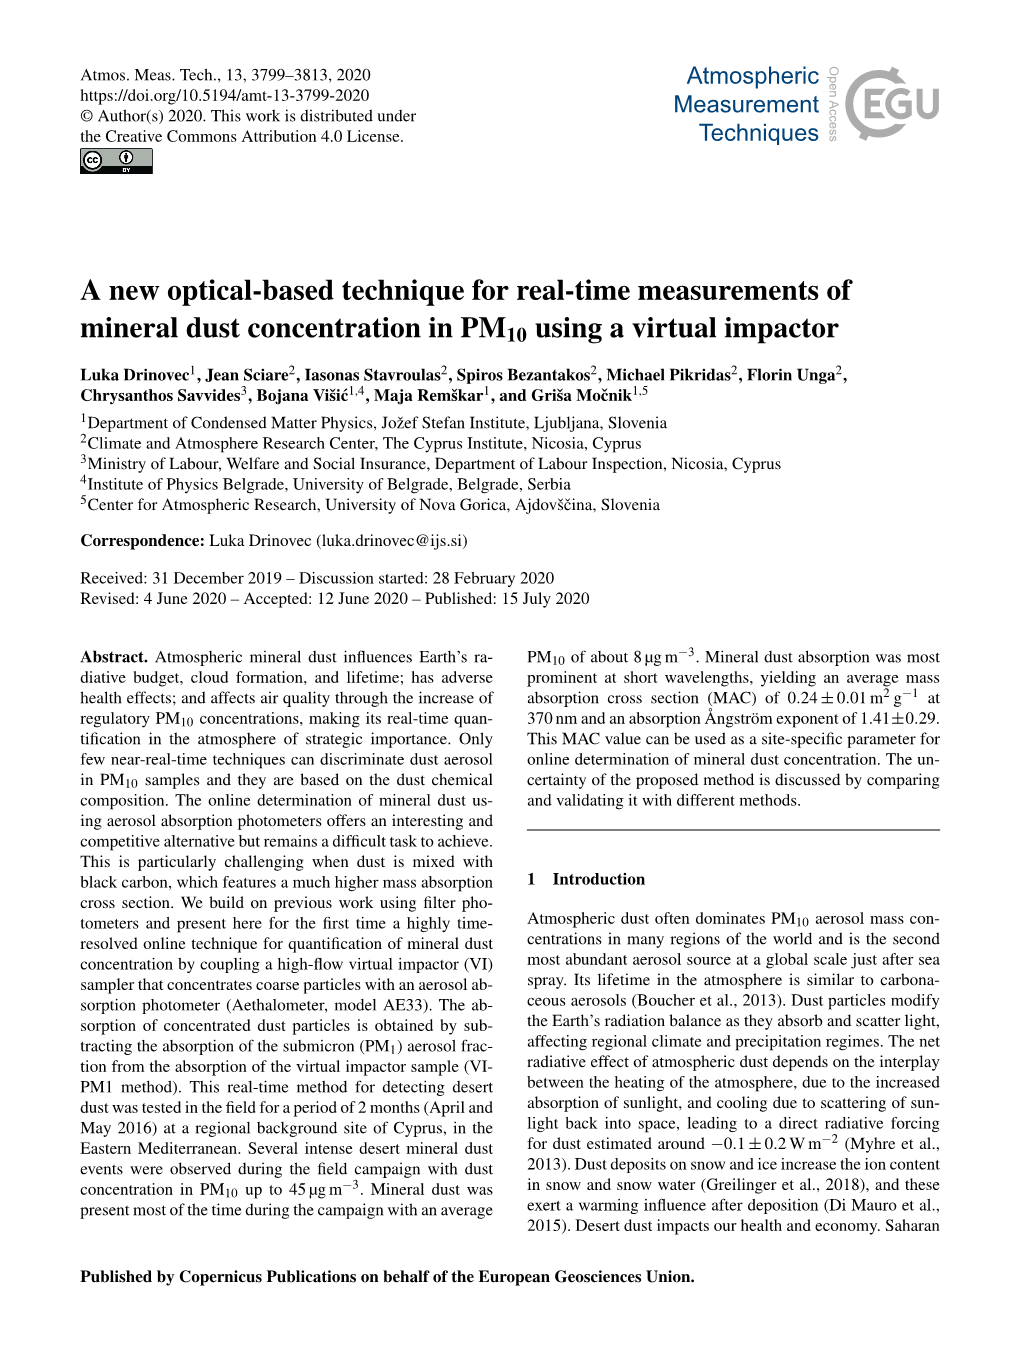 A New Optical-Based Technique for Real-Time Measurements of Mineral Dust Concentration in PM10 Using a Virtual Impactor